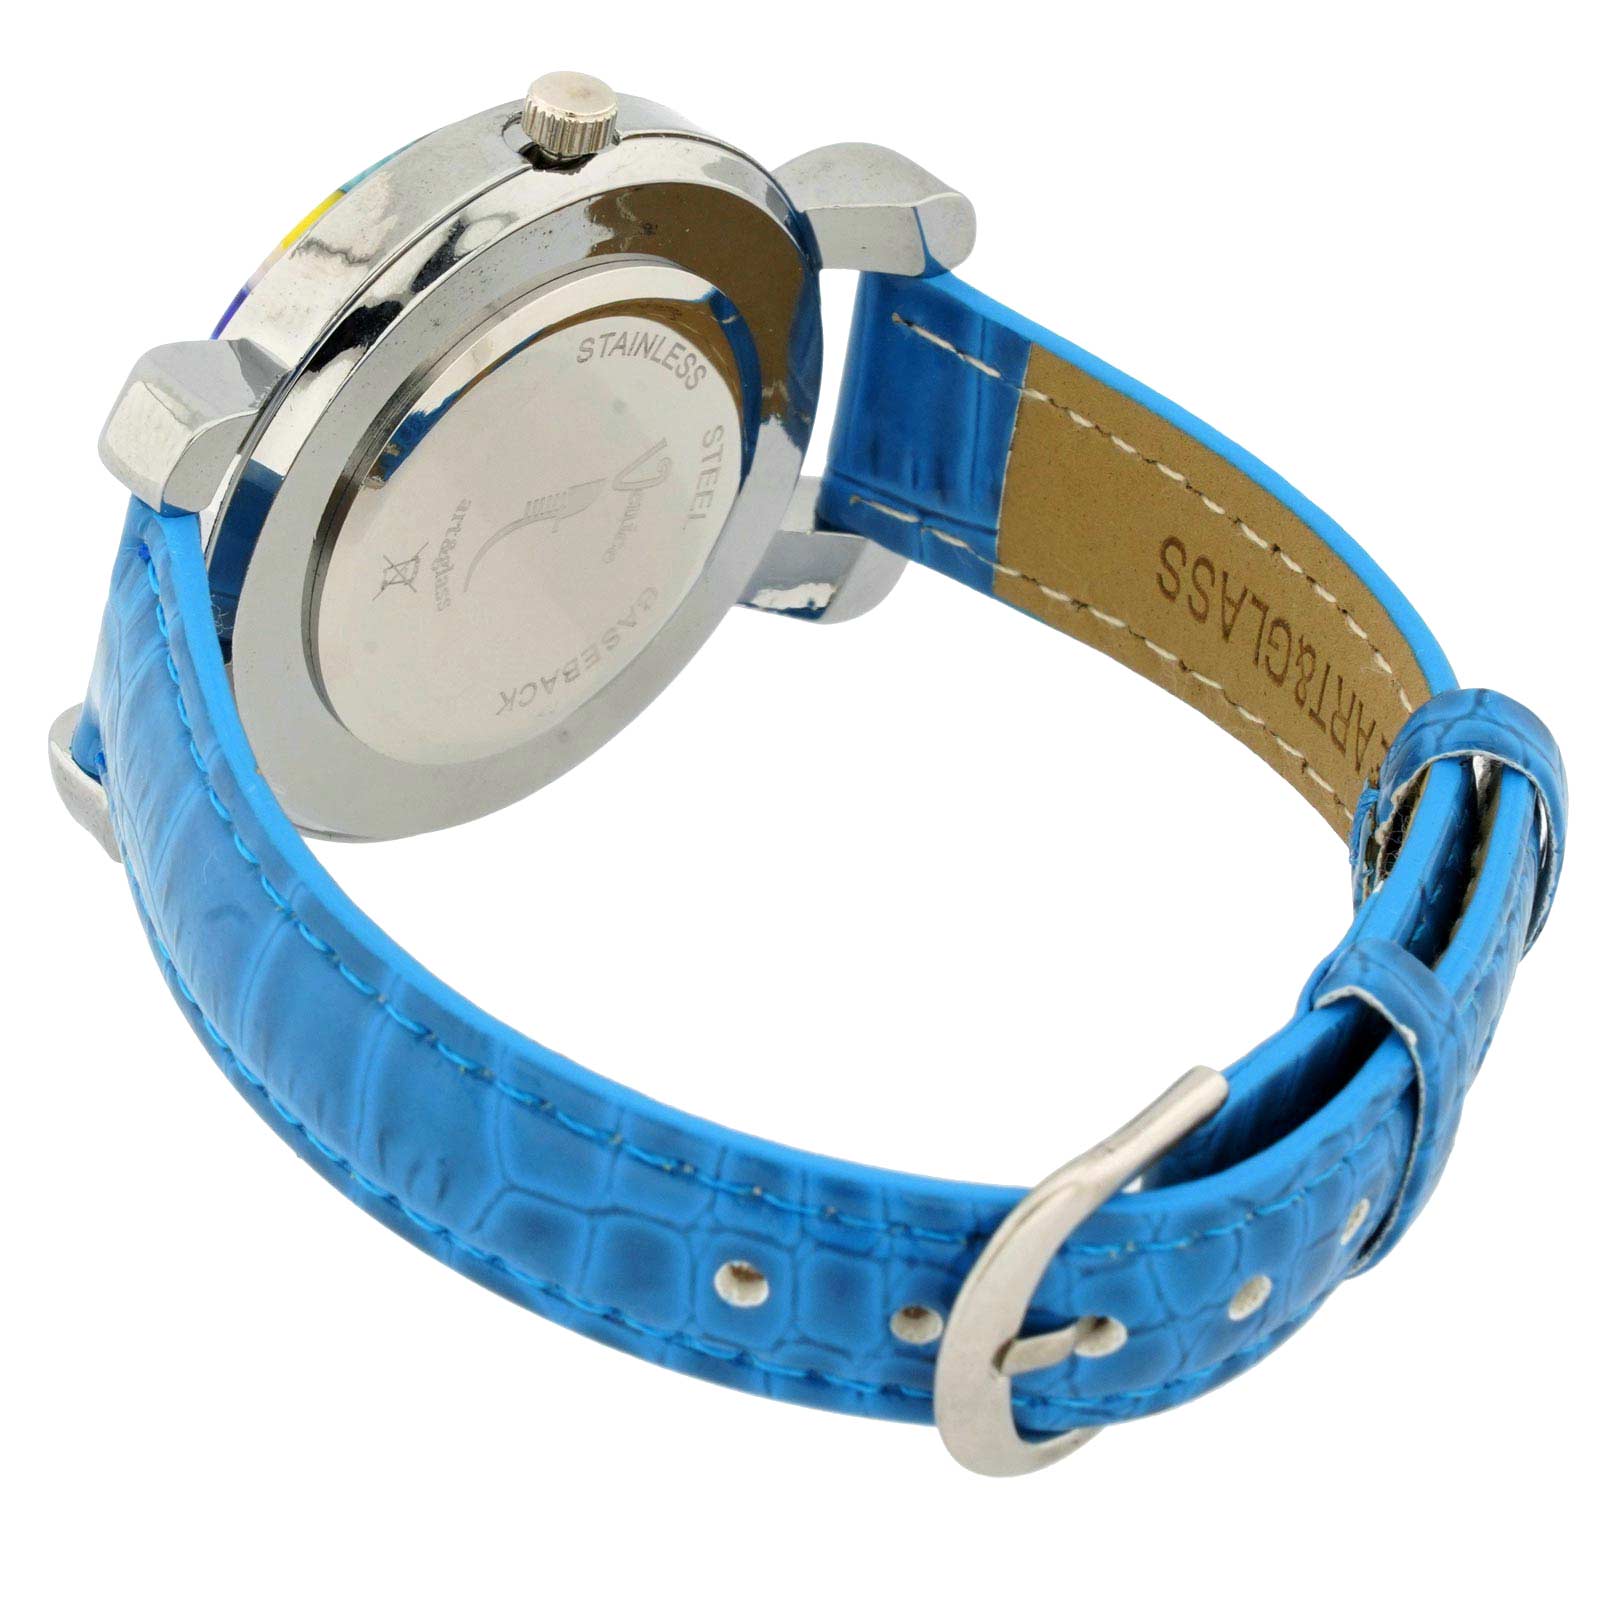 Serena Murano Millefiori Watch With Leather Band - Light Blue